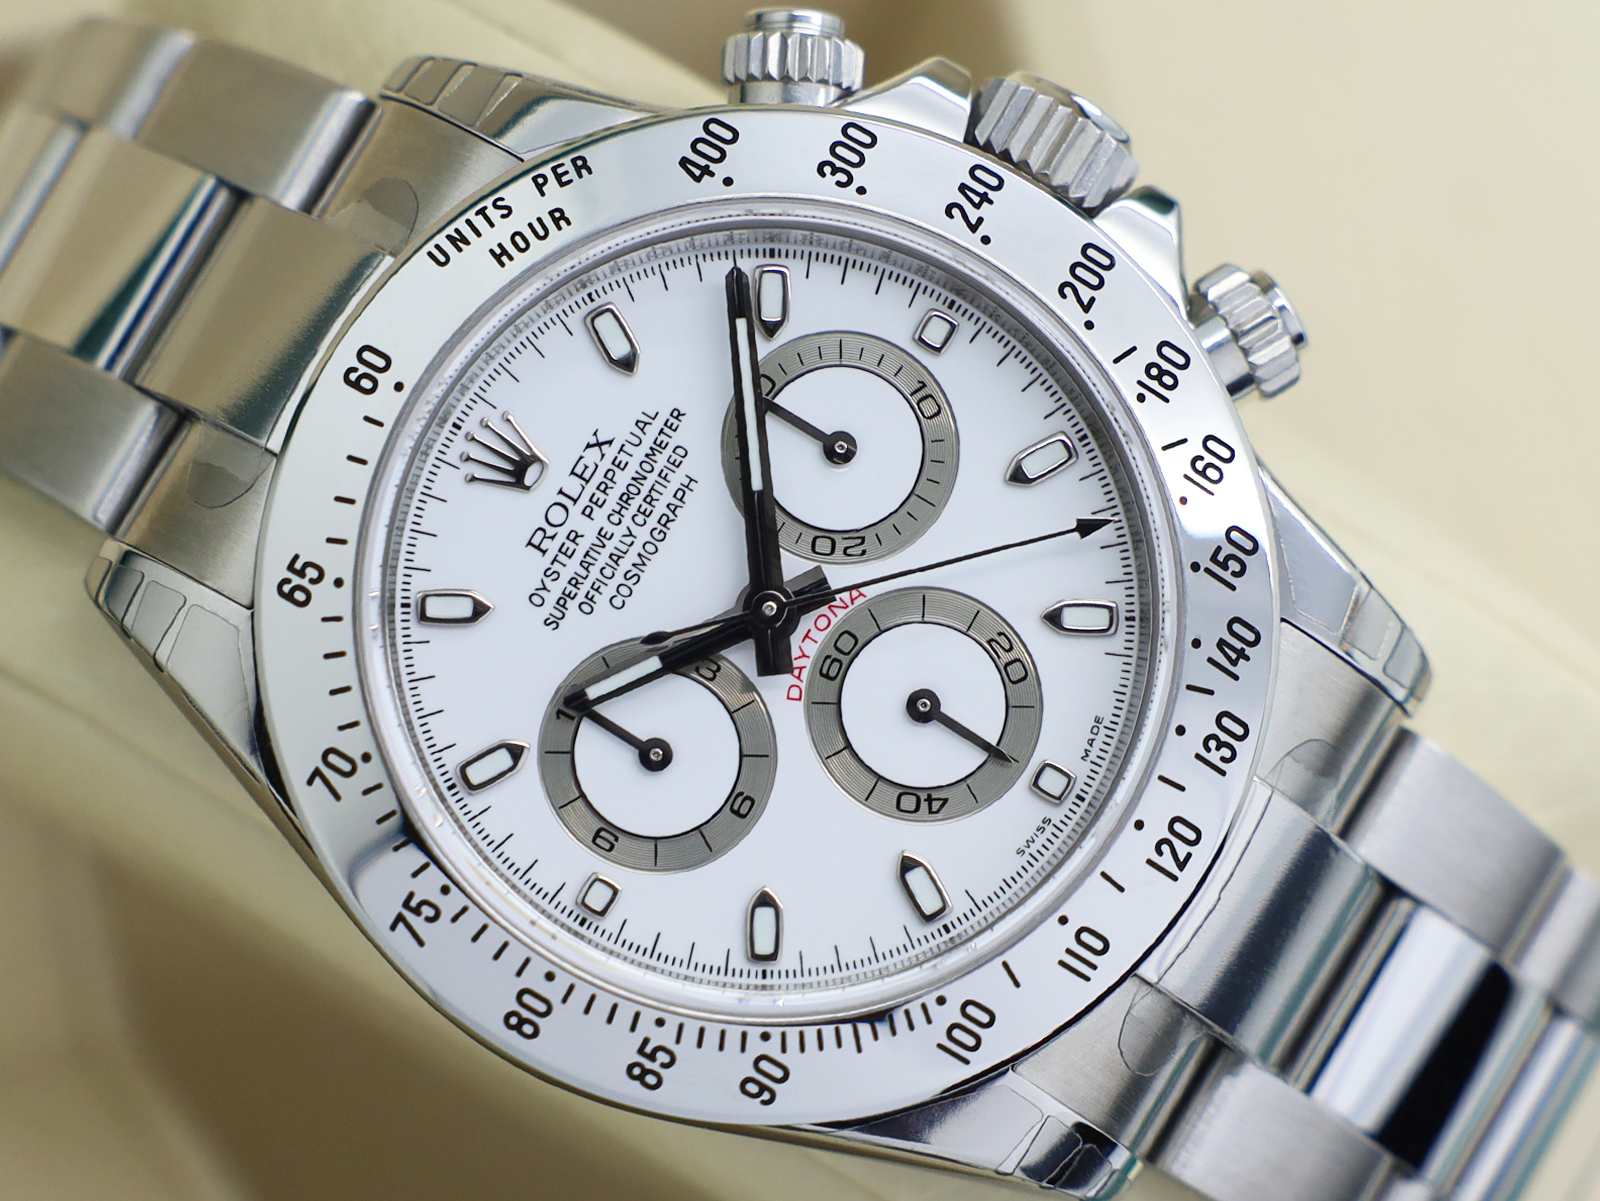 GENTS ROLEX 116520 STAINLESS STEEL WHITE CHROMALIGHT DIAL UNWORN FULL STICKERS – The Luxury Watch Company